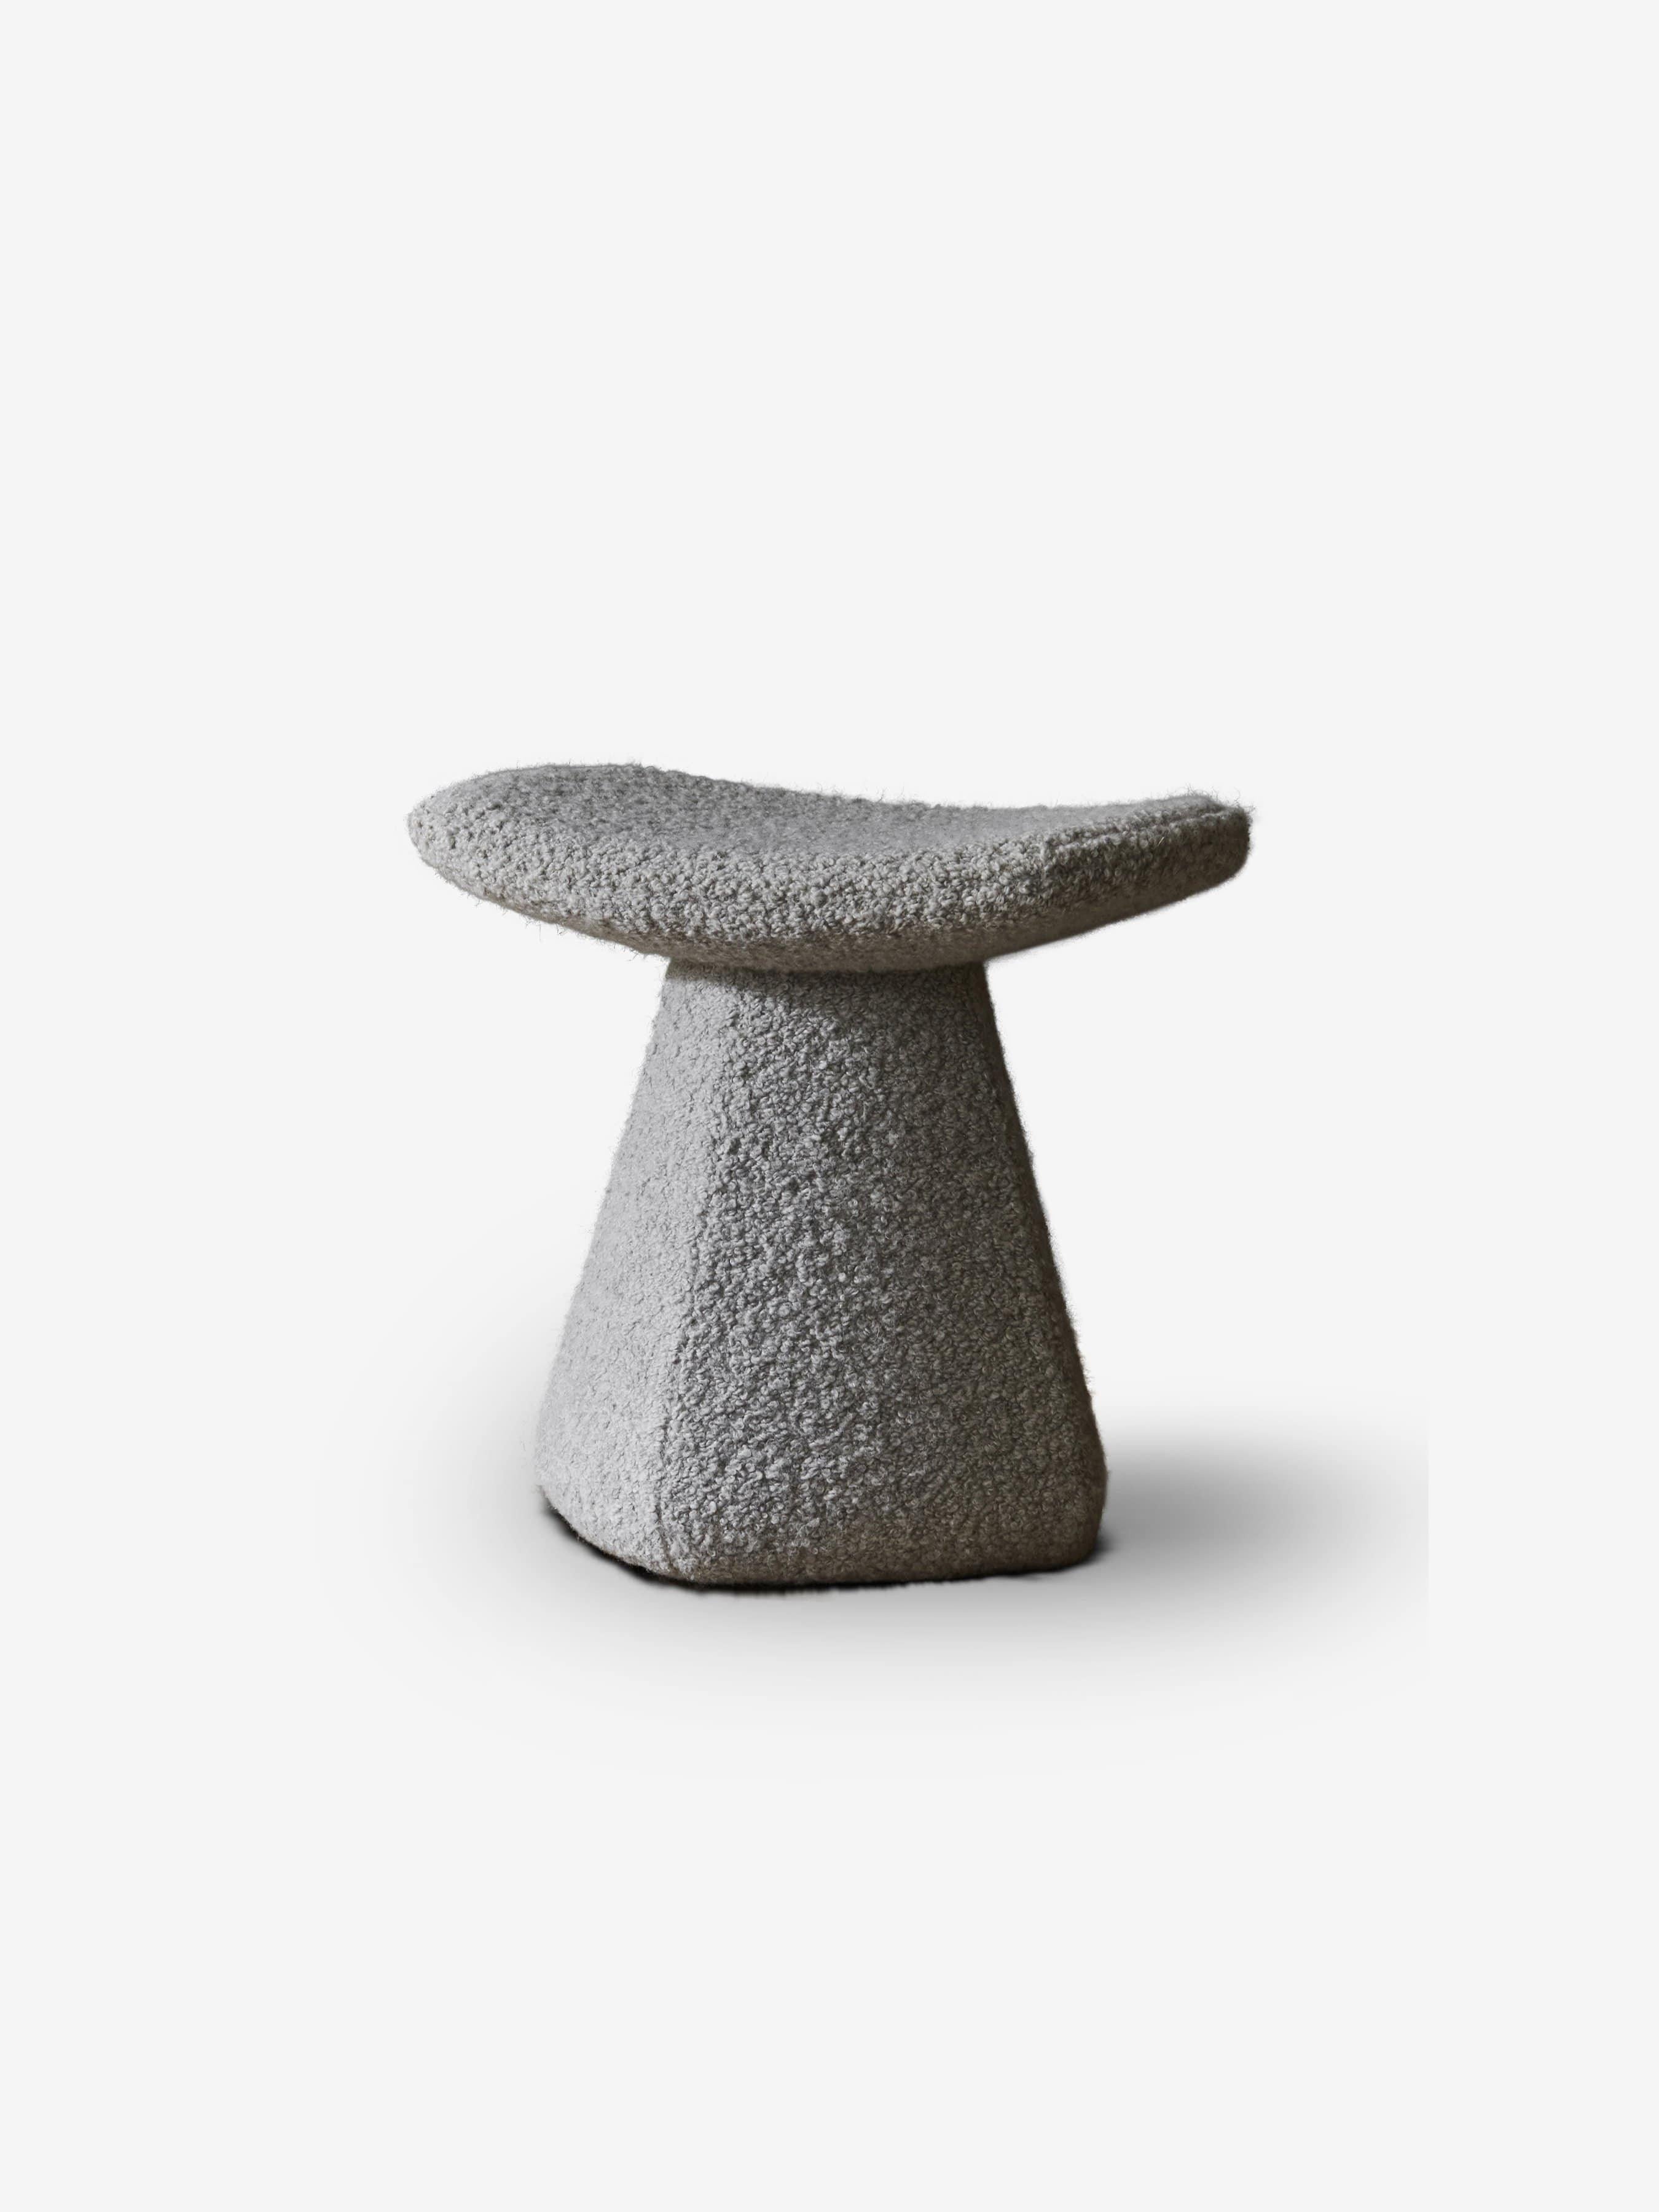 Dam Stool Upholstered by Christophe Delcourt for Collection Particuliere For Sale 3